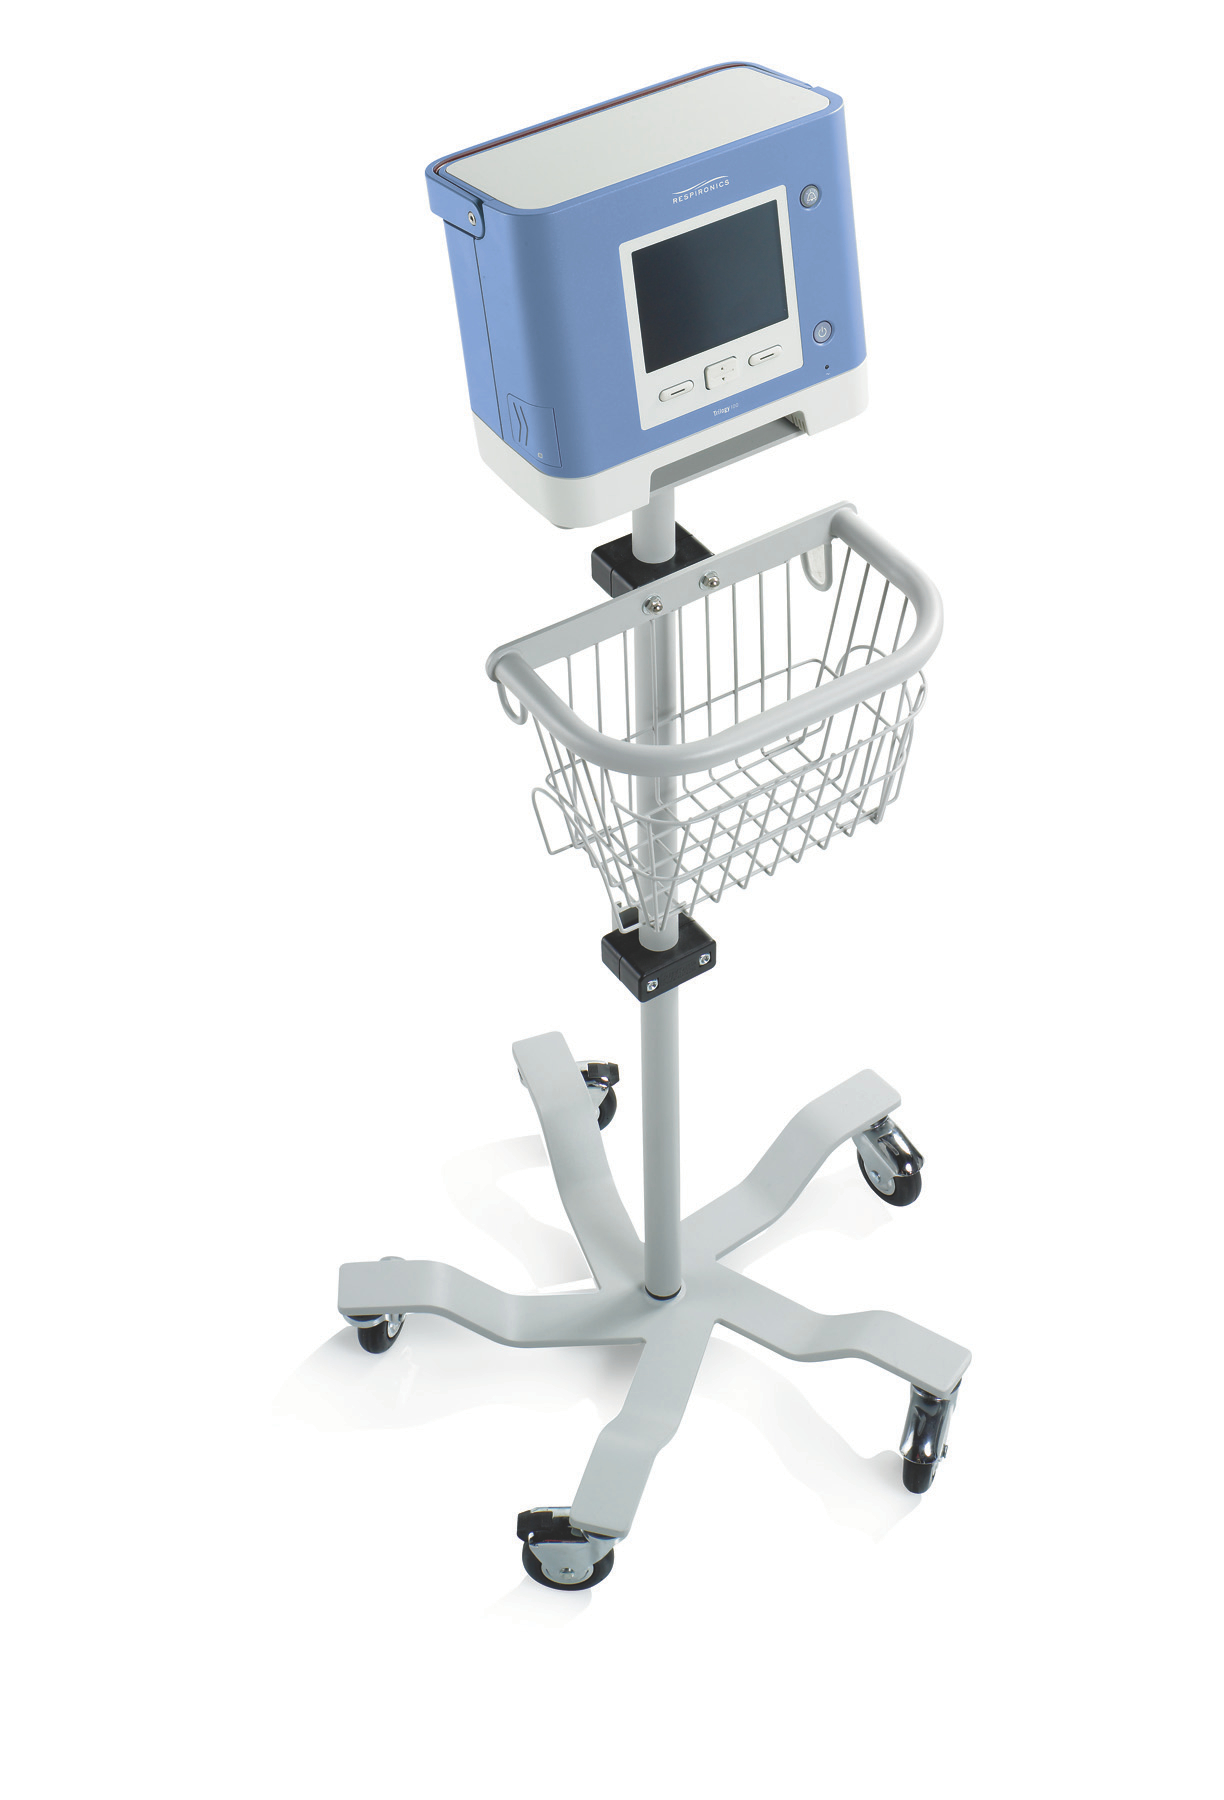 Photo of the Trilogy100 on a cart.